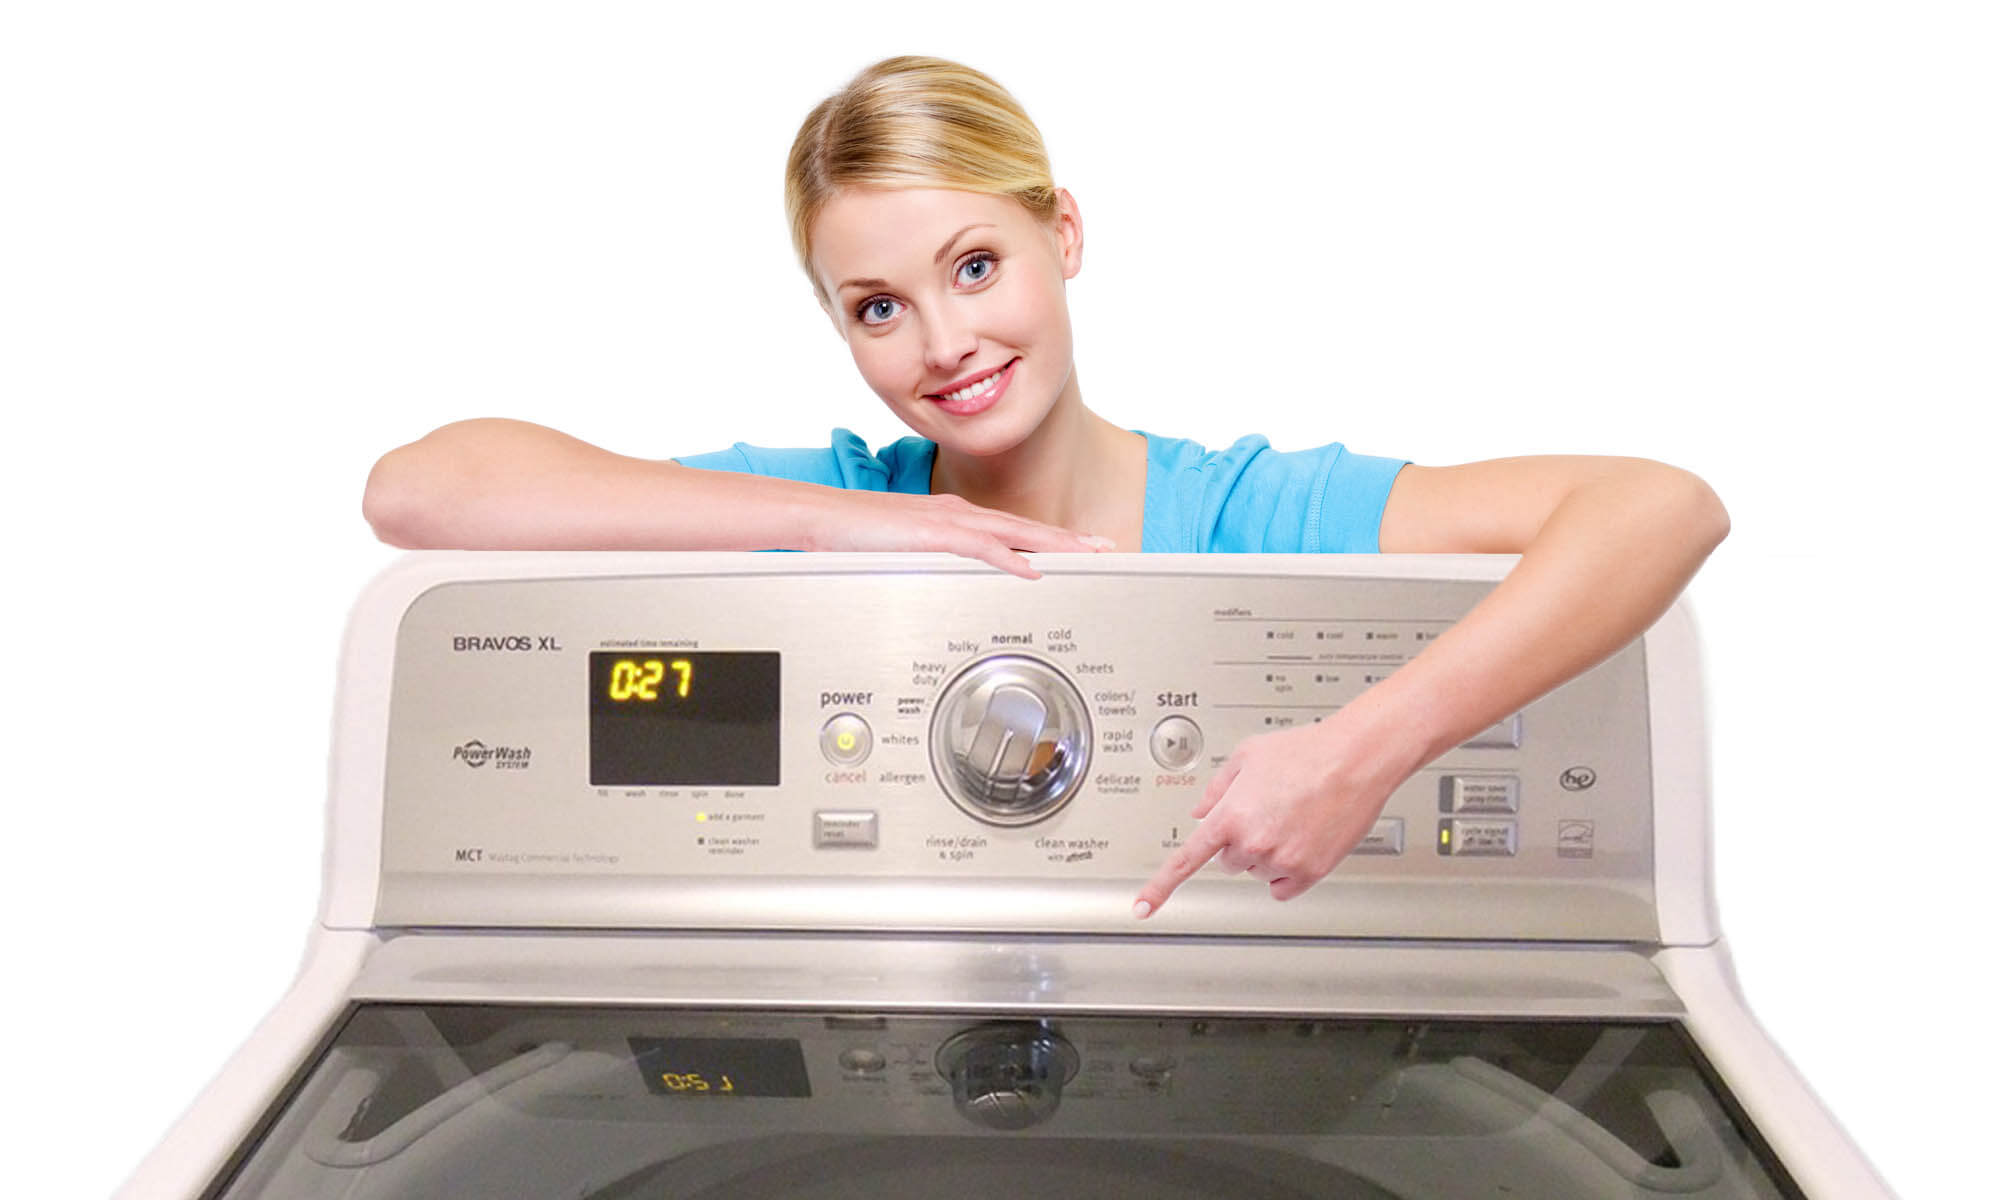 Maytag Maxima 4 3 Cu Ft Front Load Washer Mhw6000xw And 7 4 Cu Ft Dryer Med6000x Review Youtube